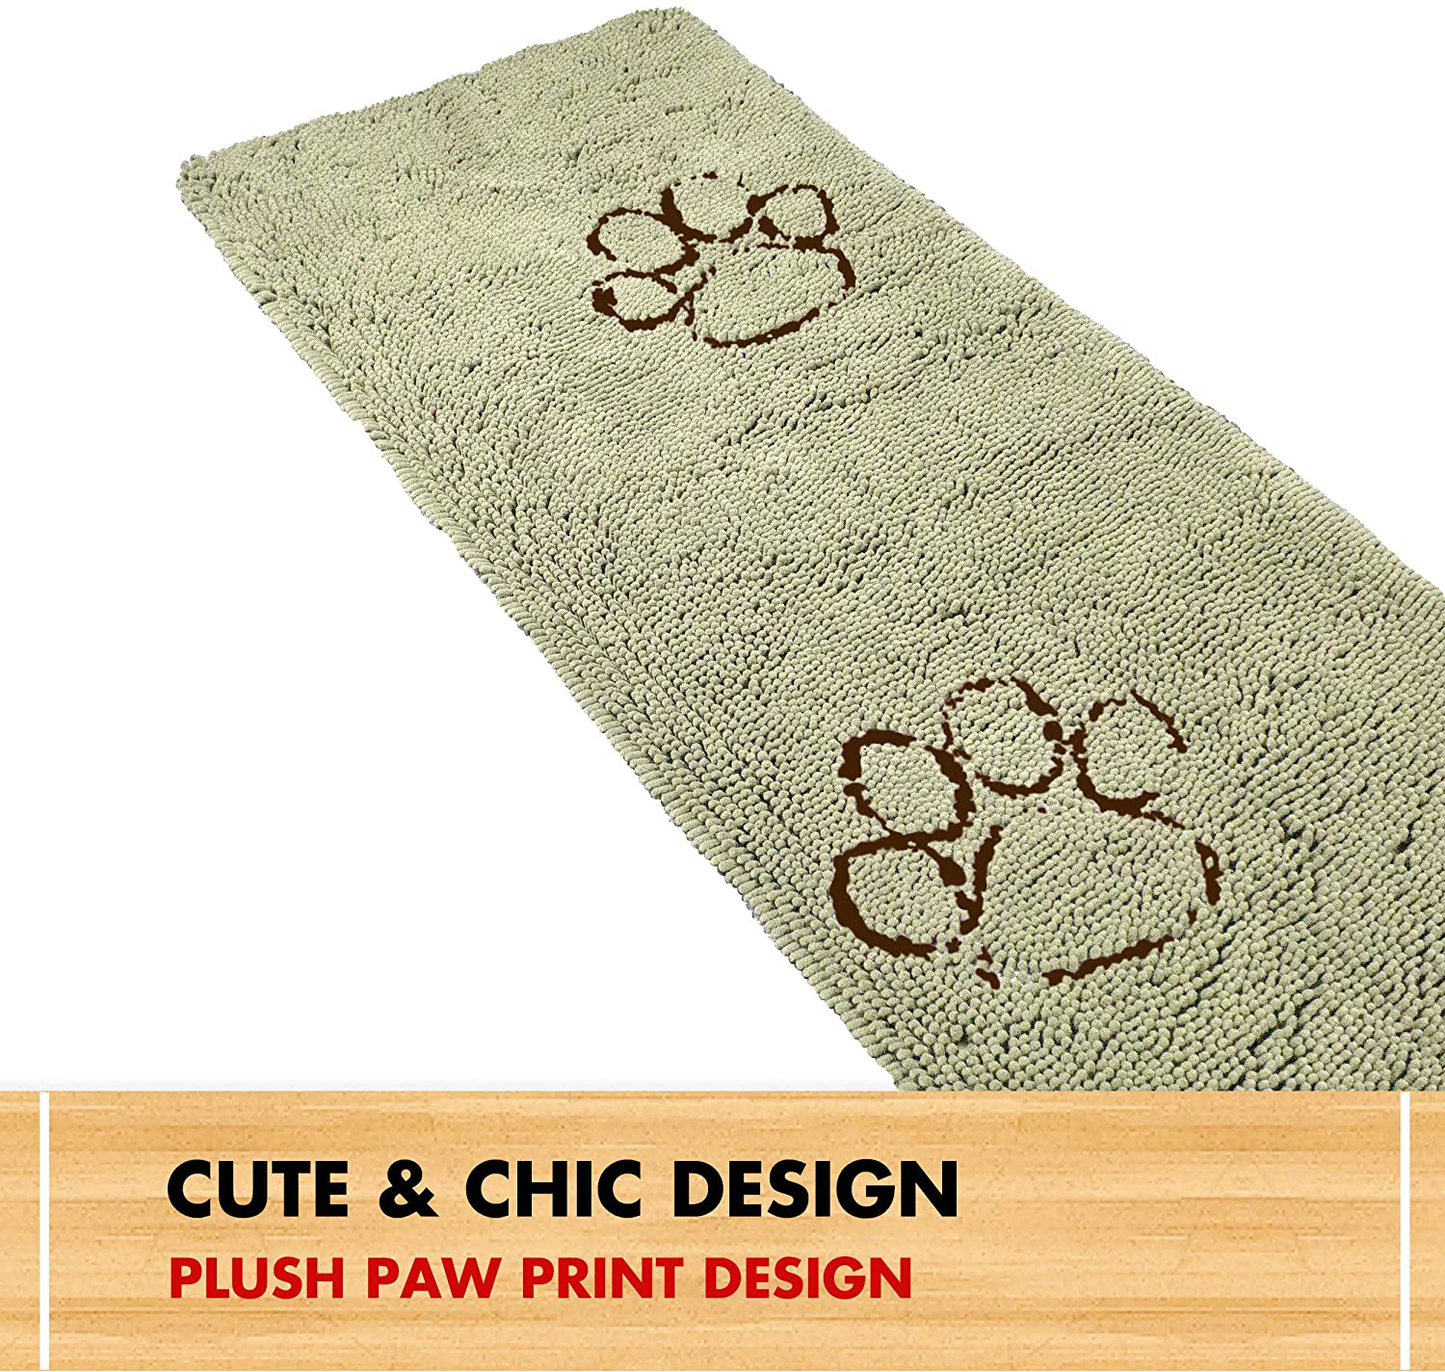 My Doggy Place - Ultra Absorbent Microfiber Dog Door Mat, Durable, Quick Drying, Washable, Prevent Mud Dirt, Keep Your House Clean (Pink w/Paw Print